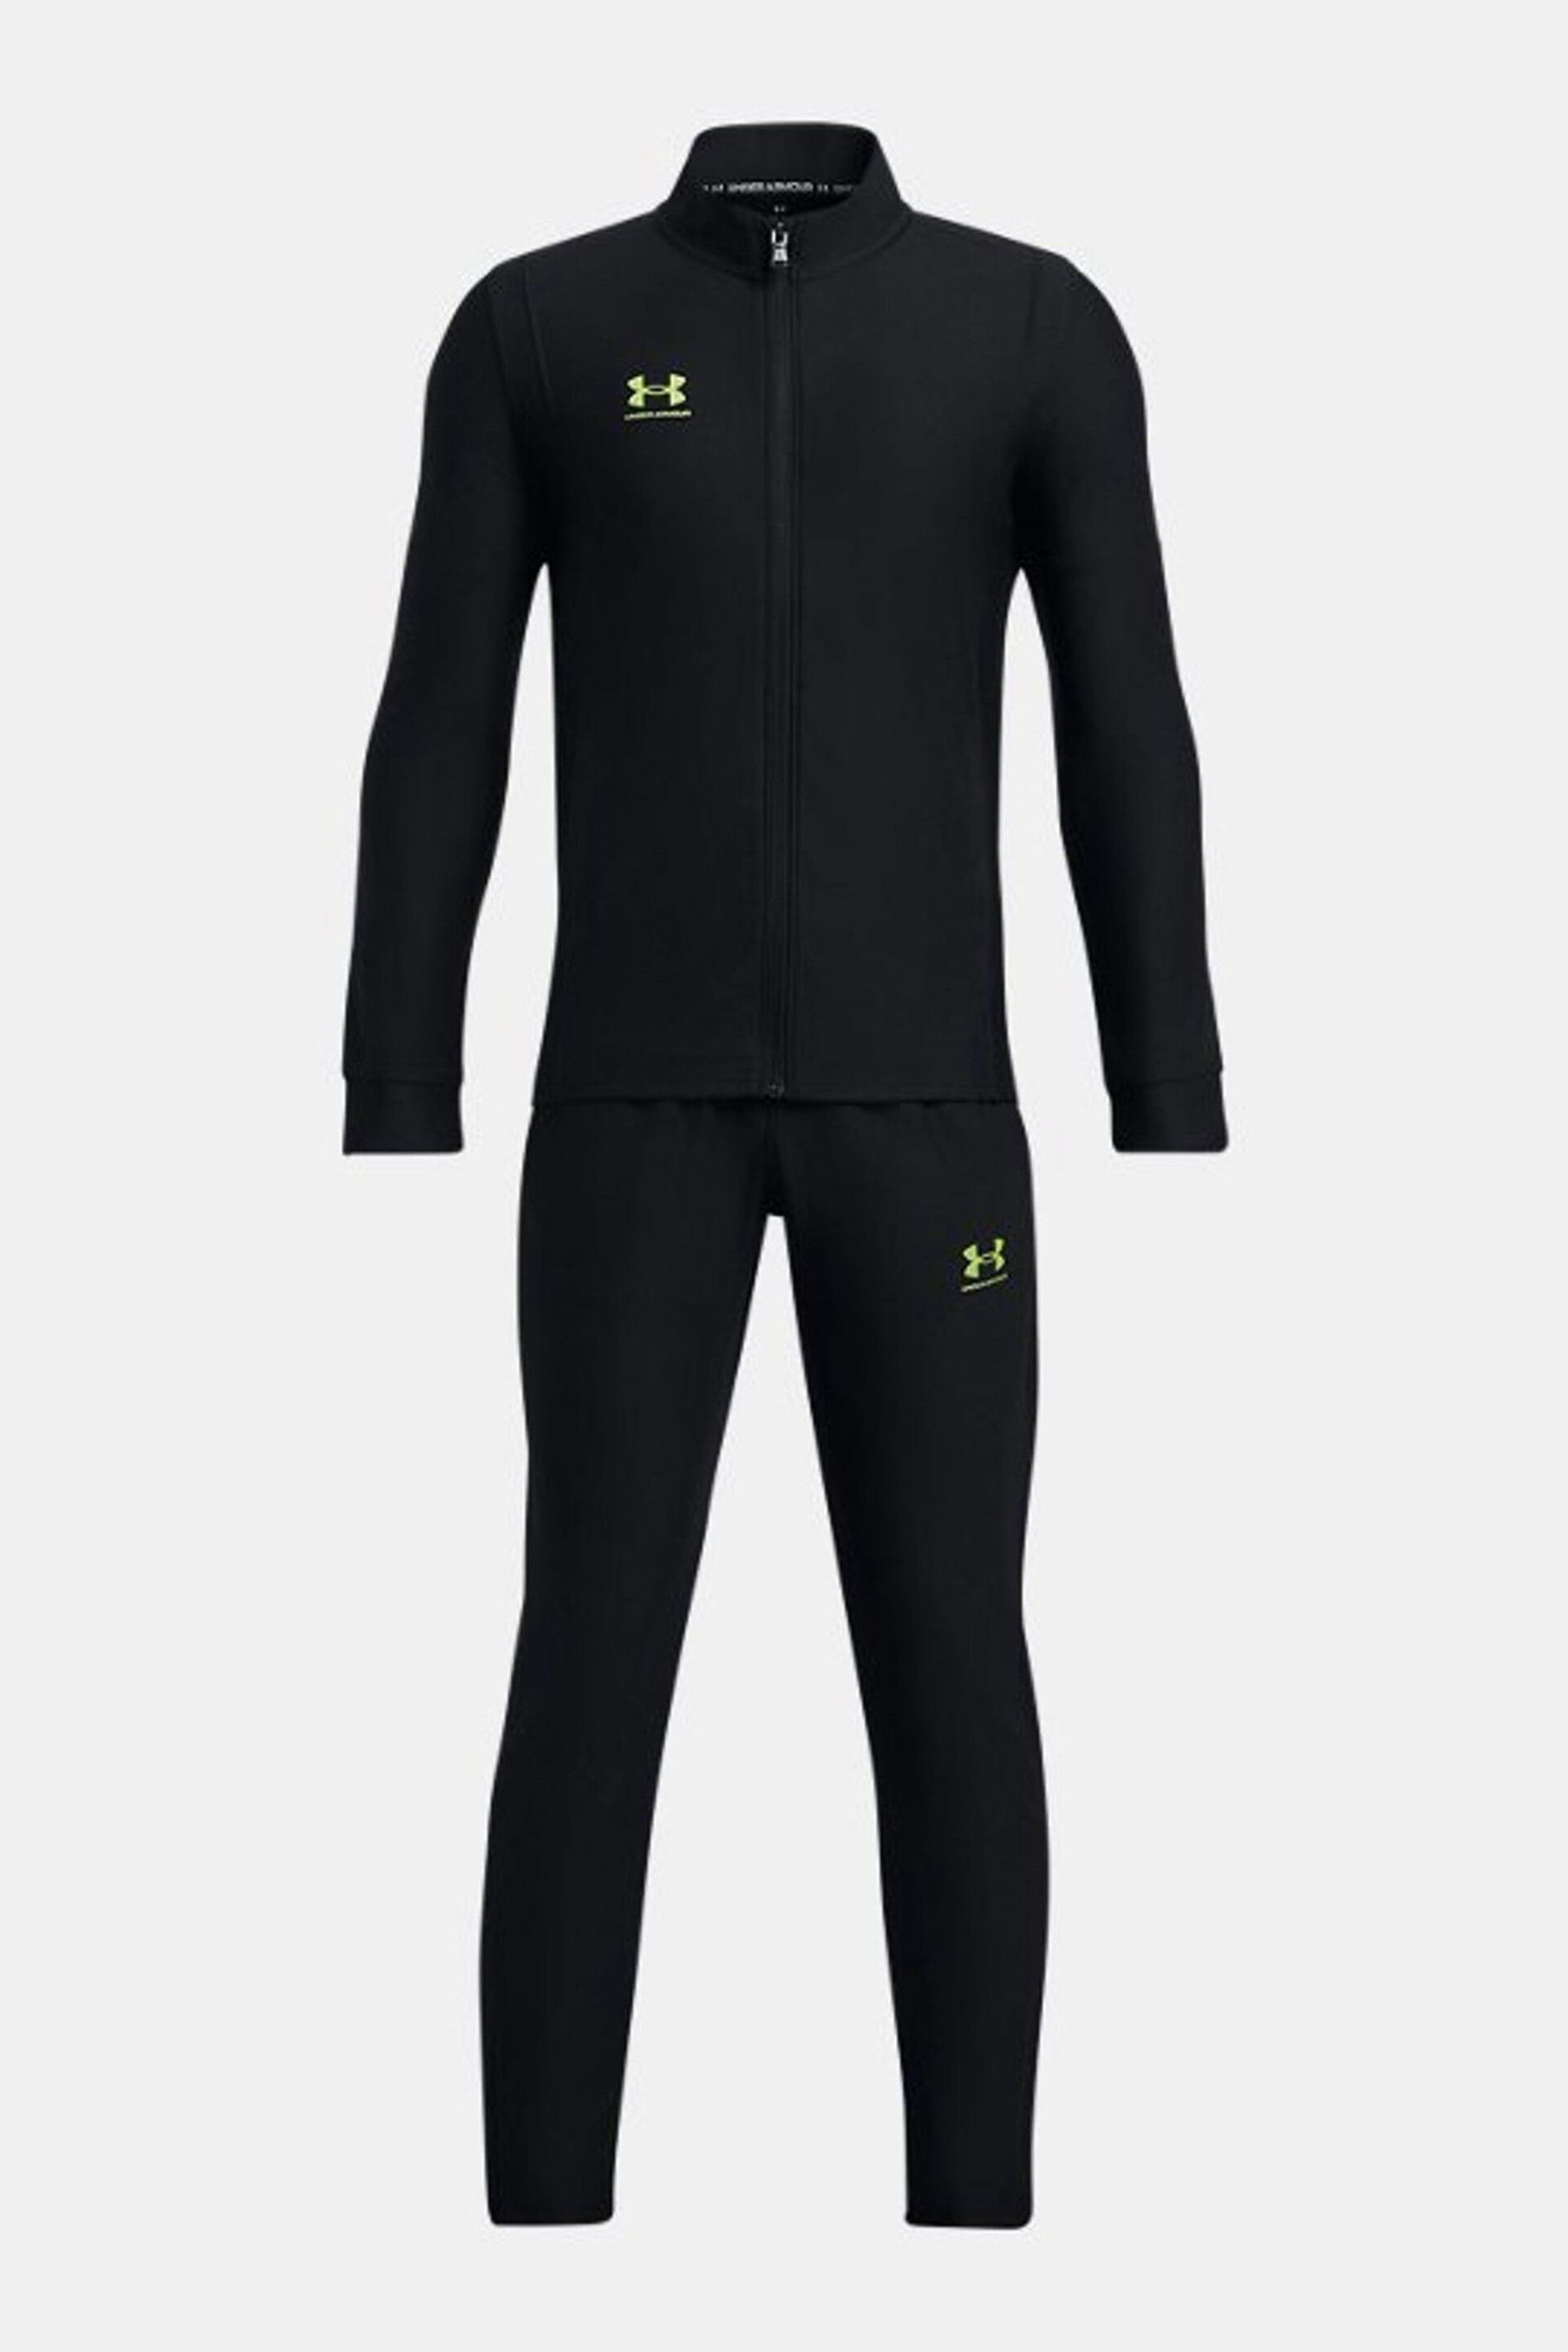 Under Armour Black Challenger Tracksuit - Image 1 of 1